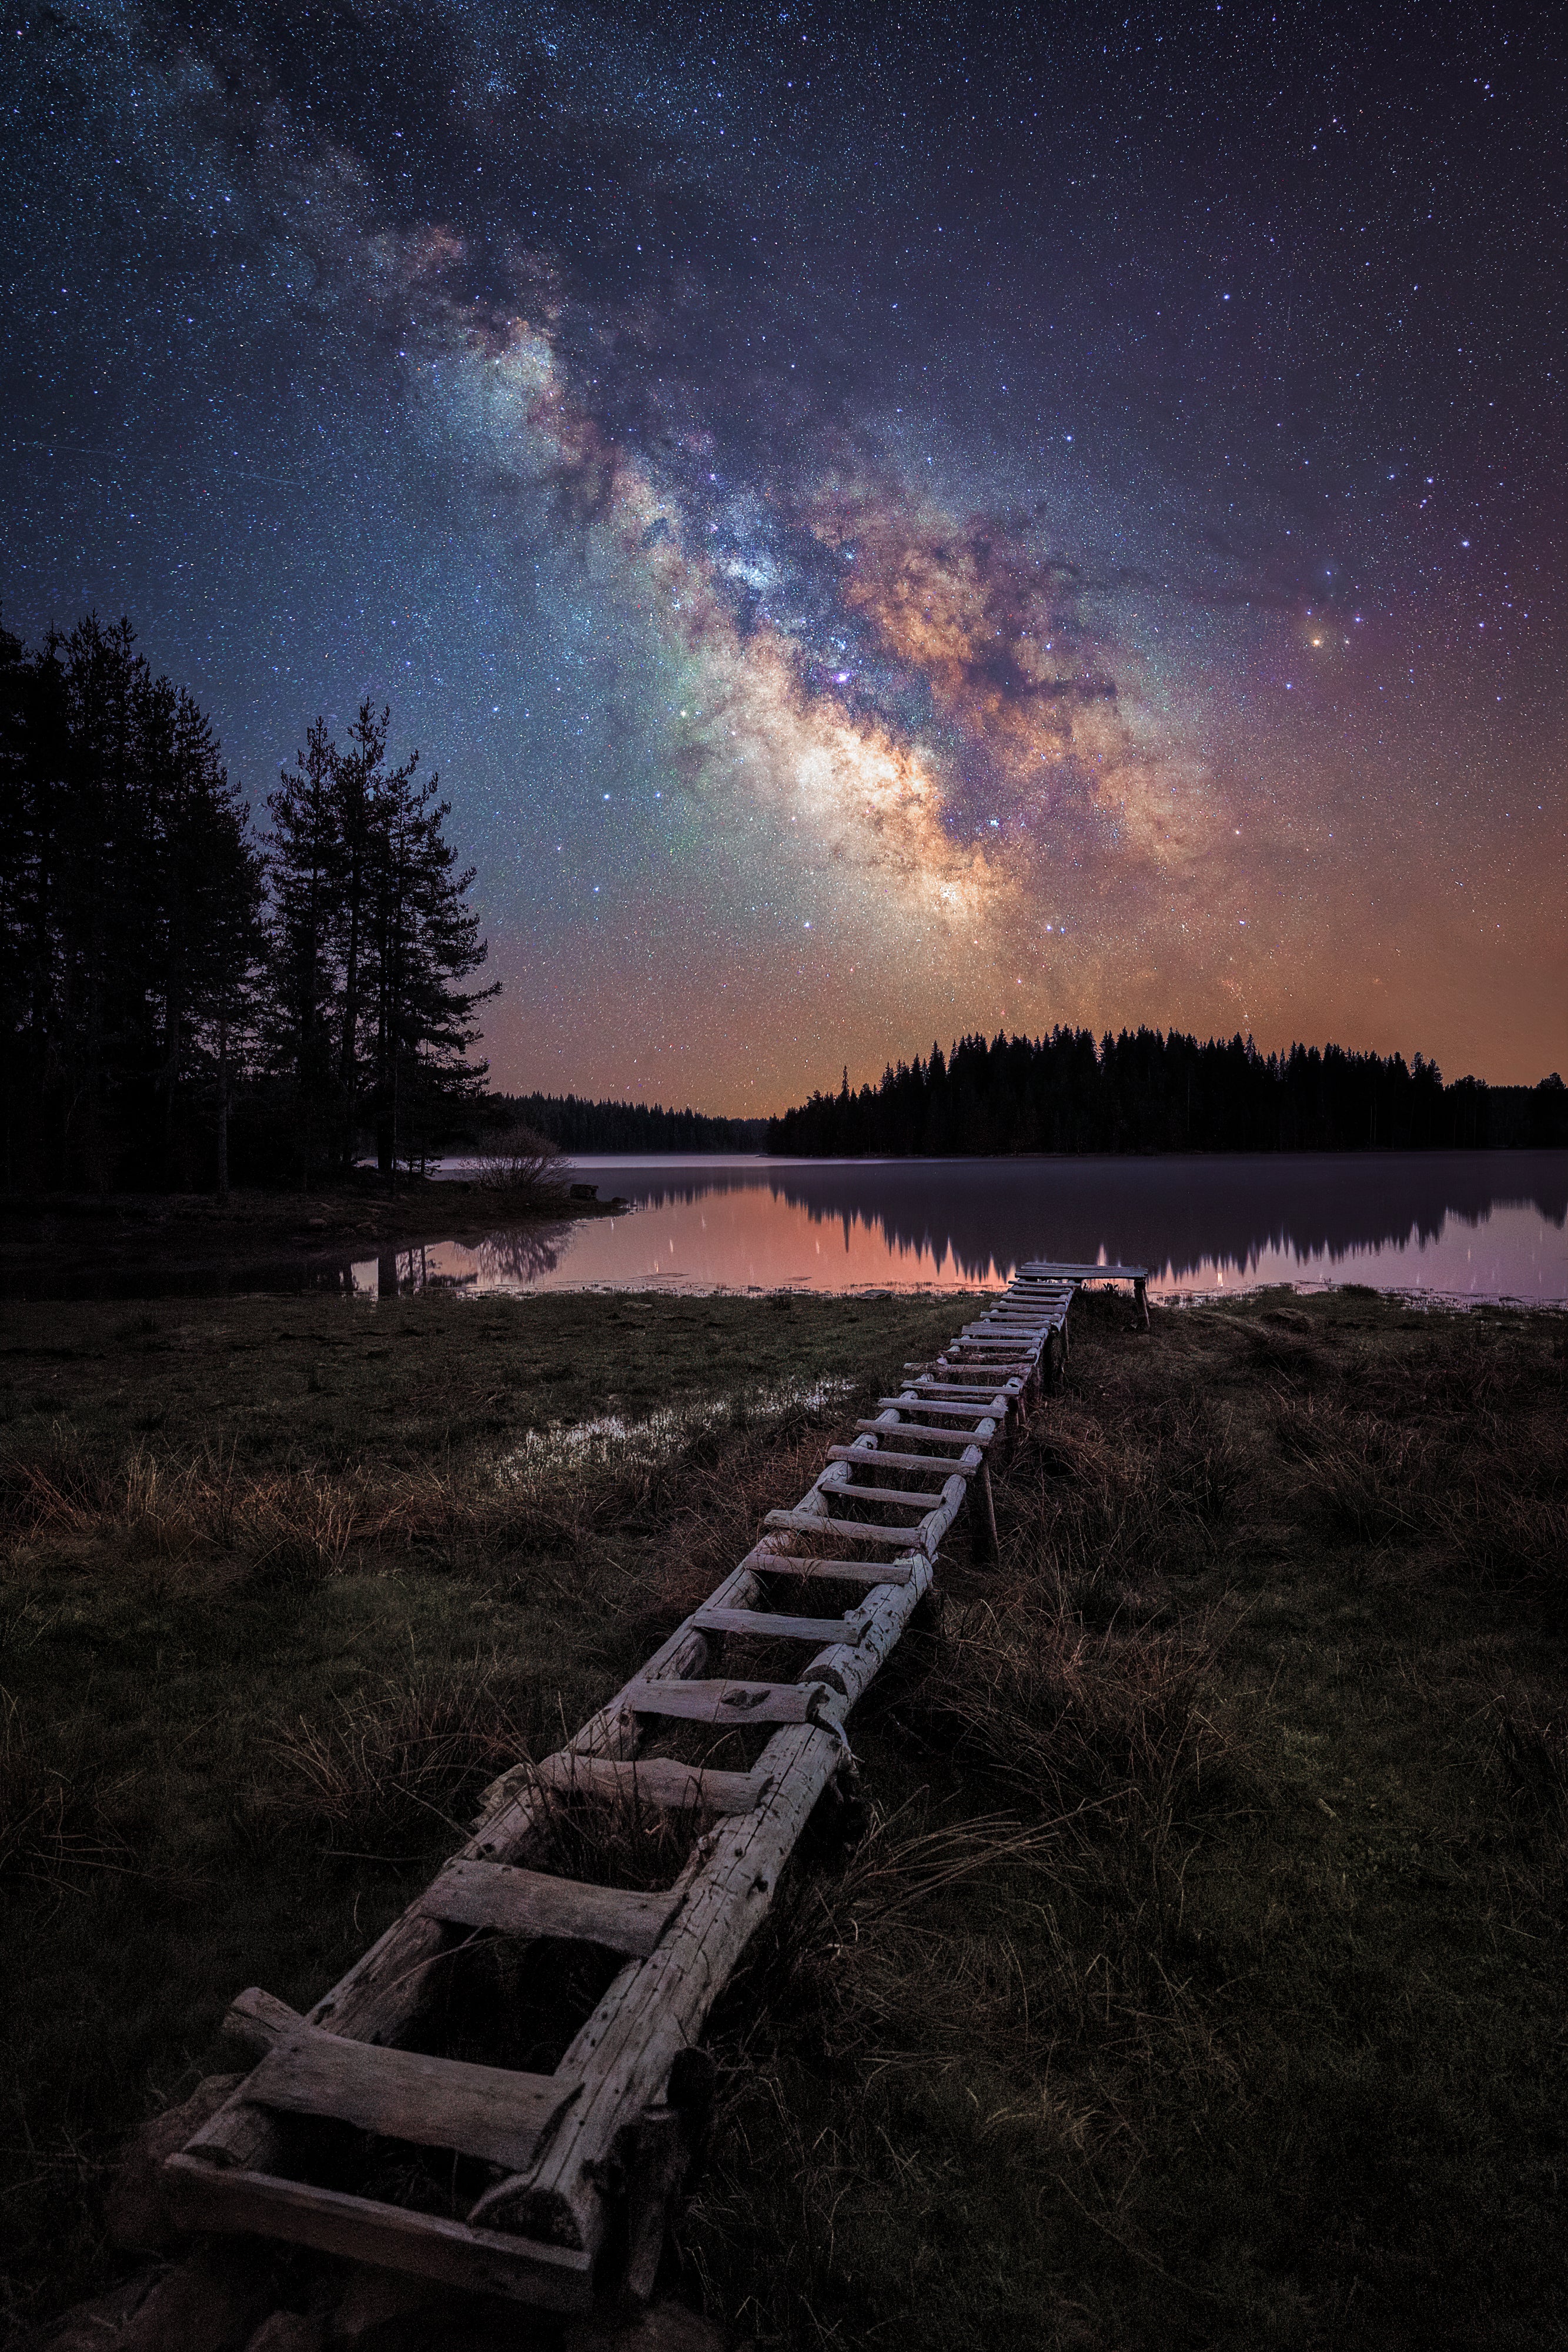 A wooden step structure in Bulgaria, the Milky Way looming above. (Photo: © Mihail Minkov)